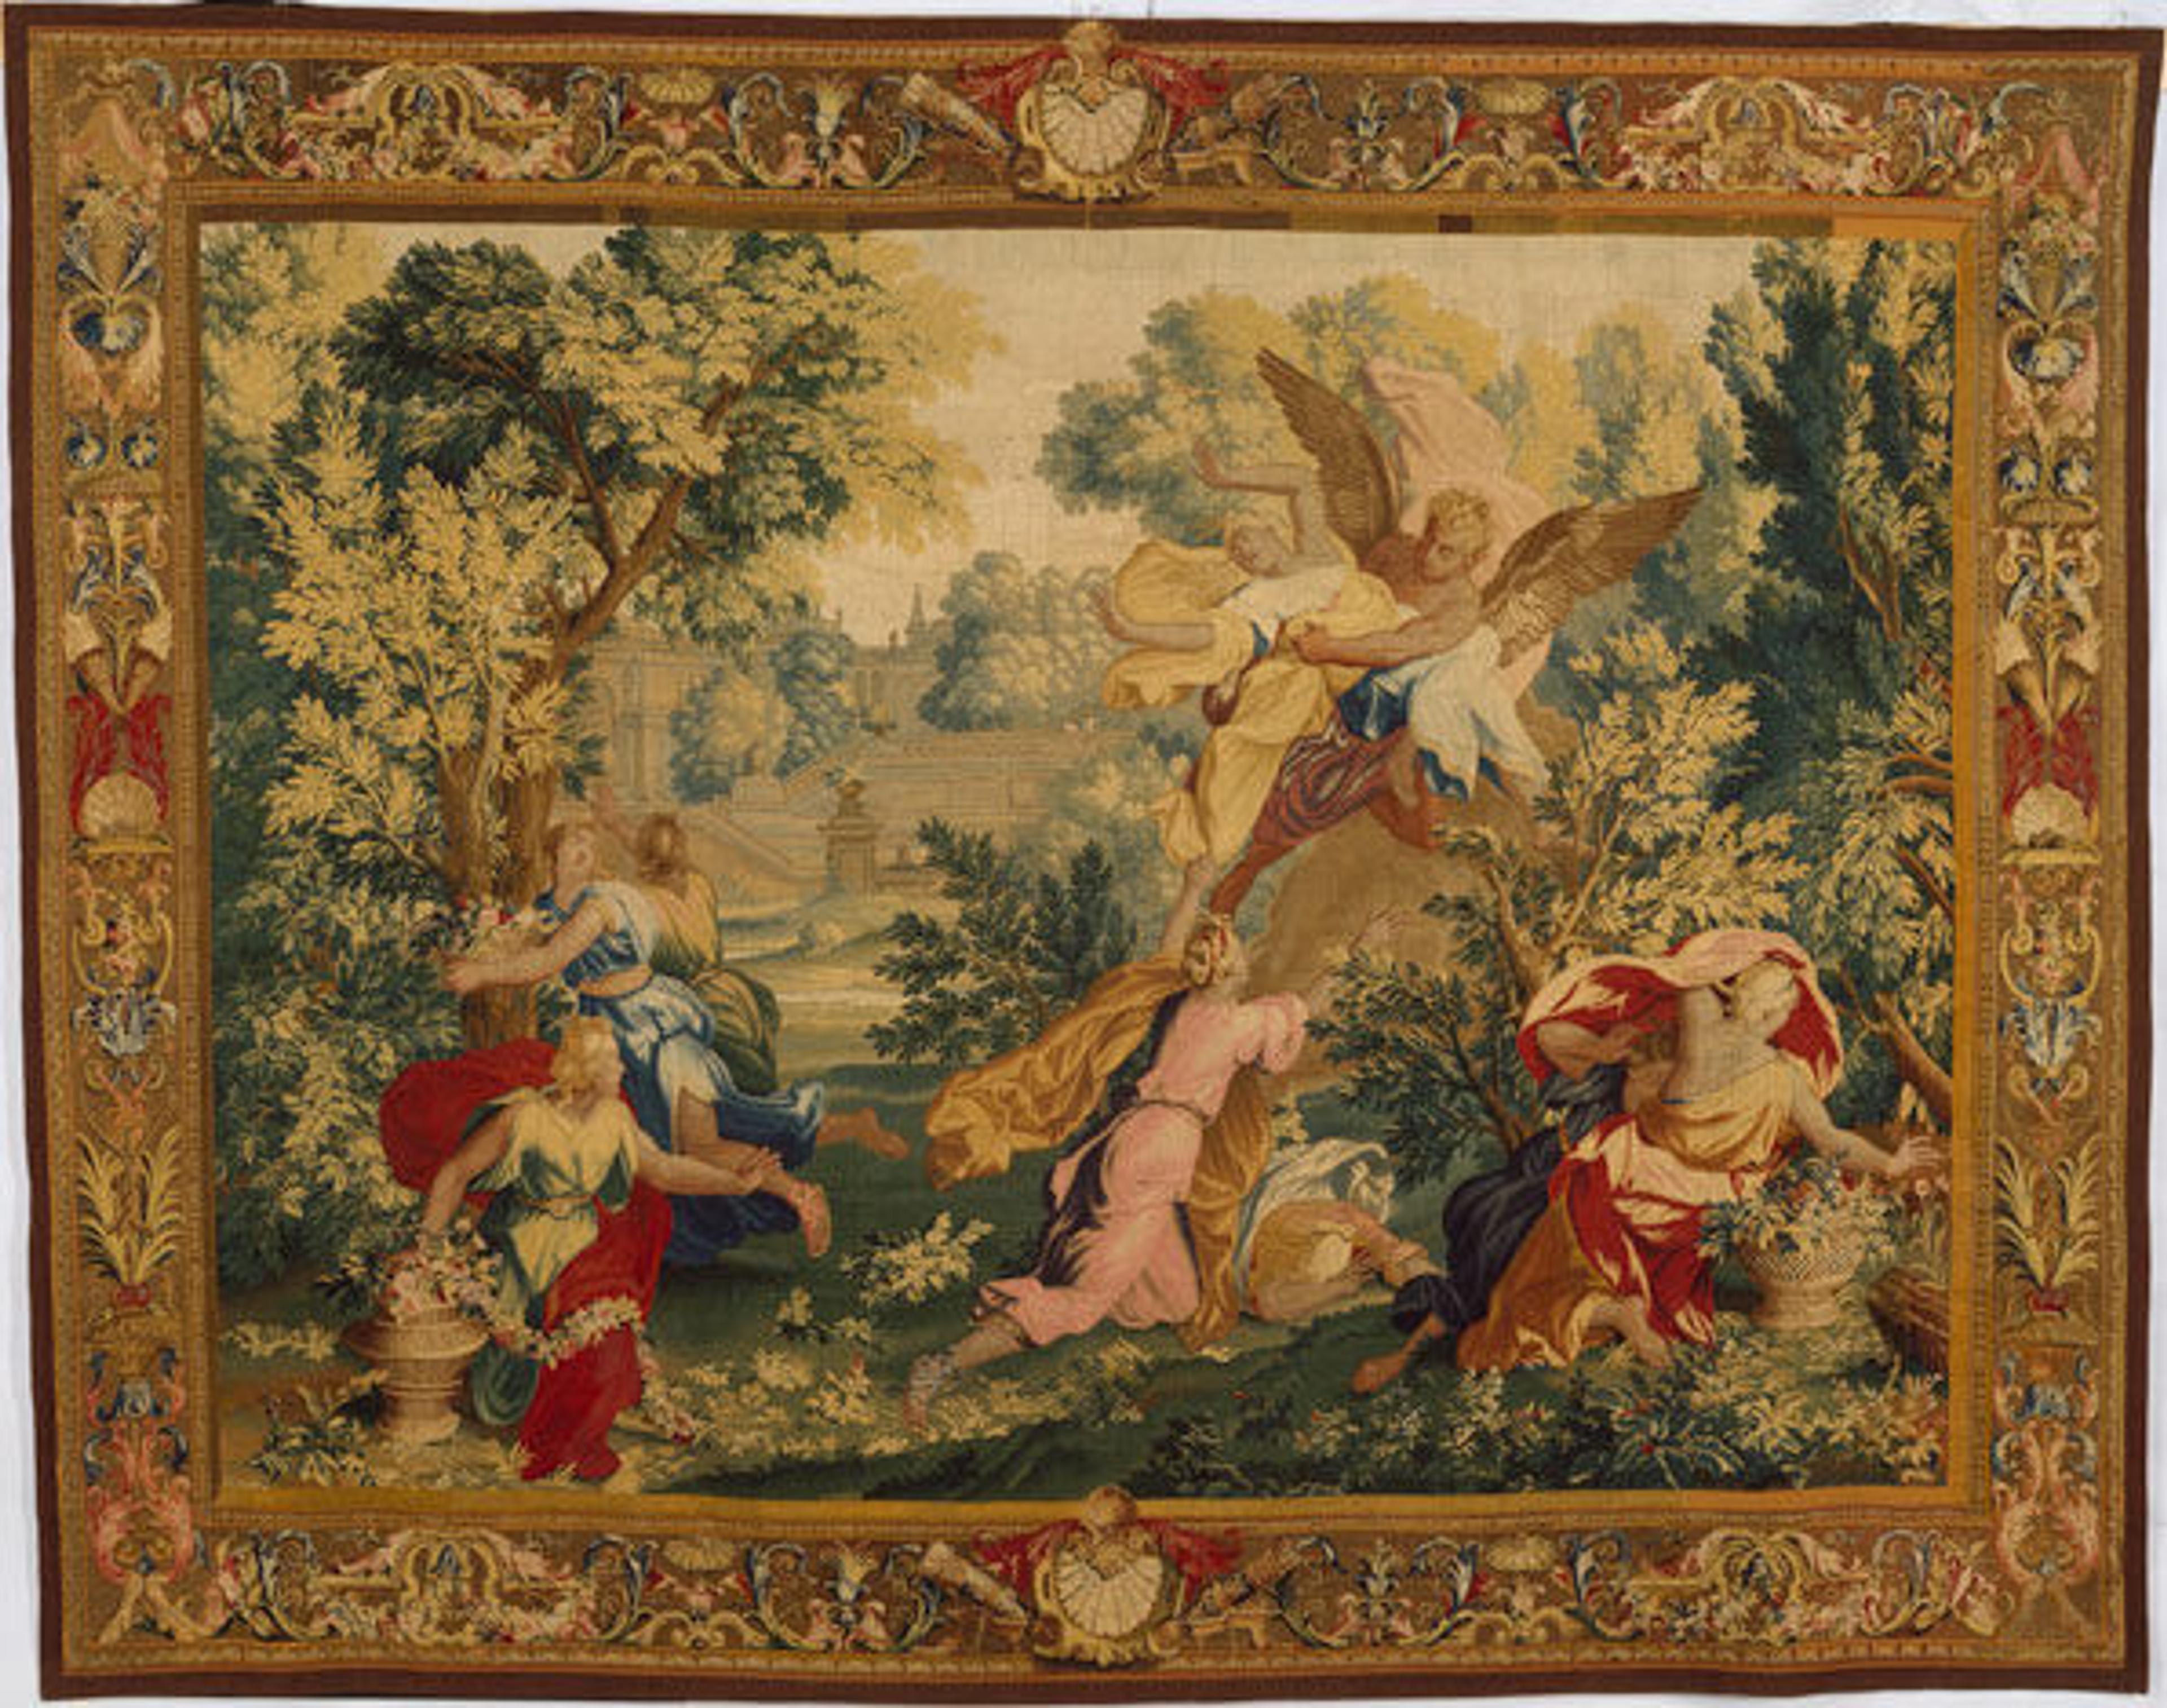 Boreas and Orithyia from a set of scenes from Ovid's Metamorphoses